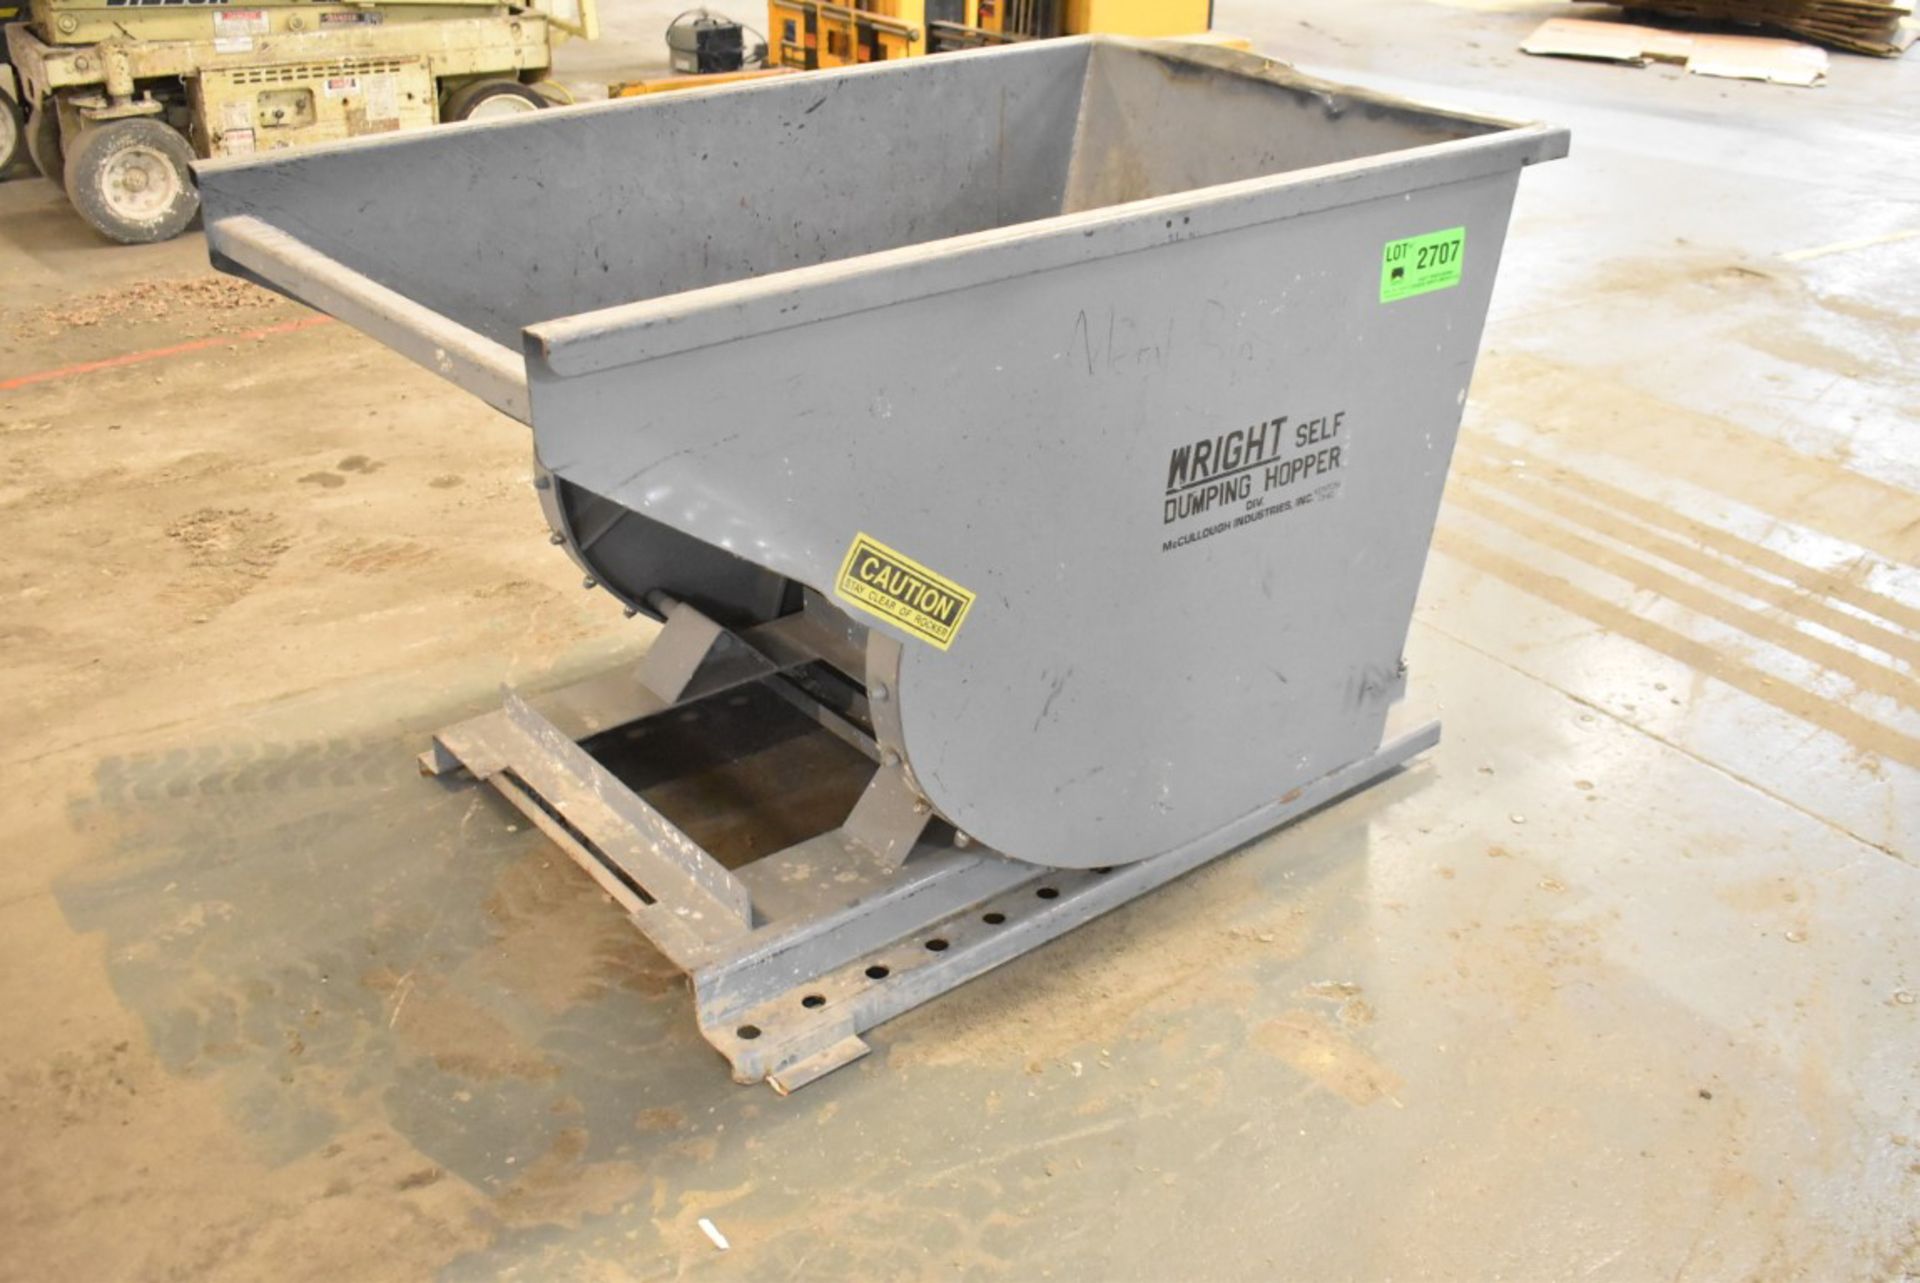 WRIGHT SELF DUMPING HOPPER [RIGGING FEES FOR LOT #2707 - $25 USD PLUS APPLICABLE TAXES]